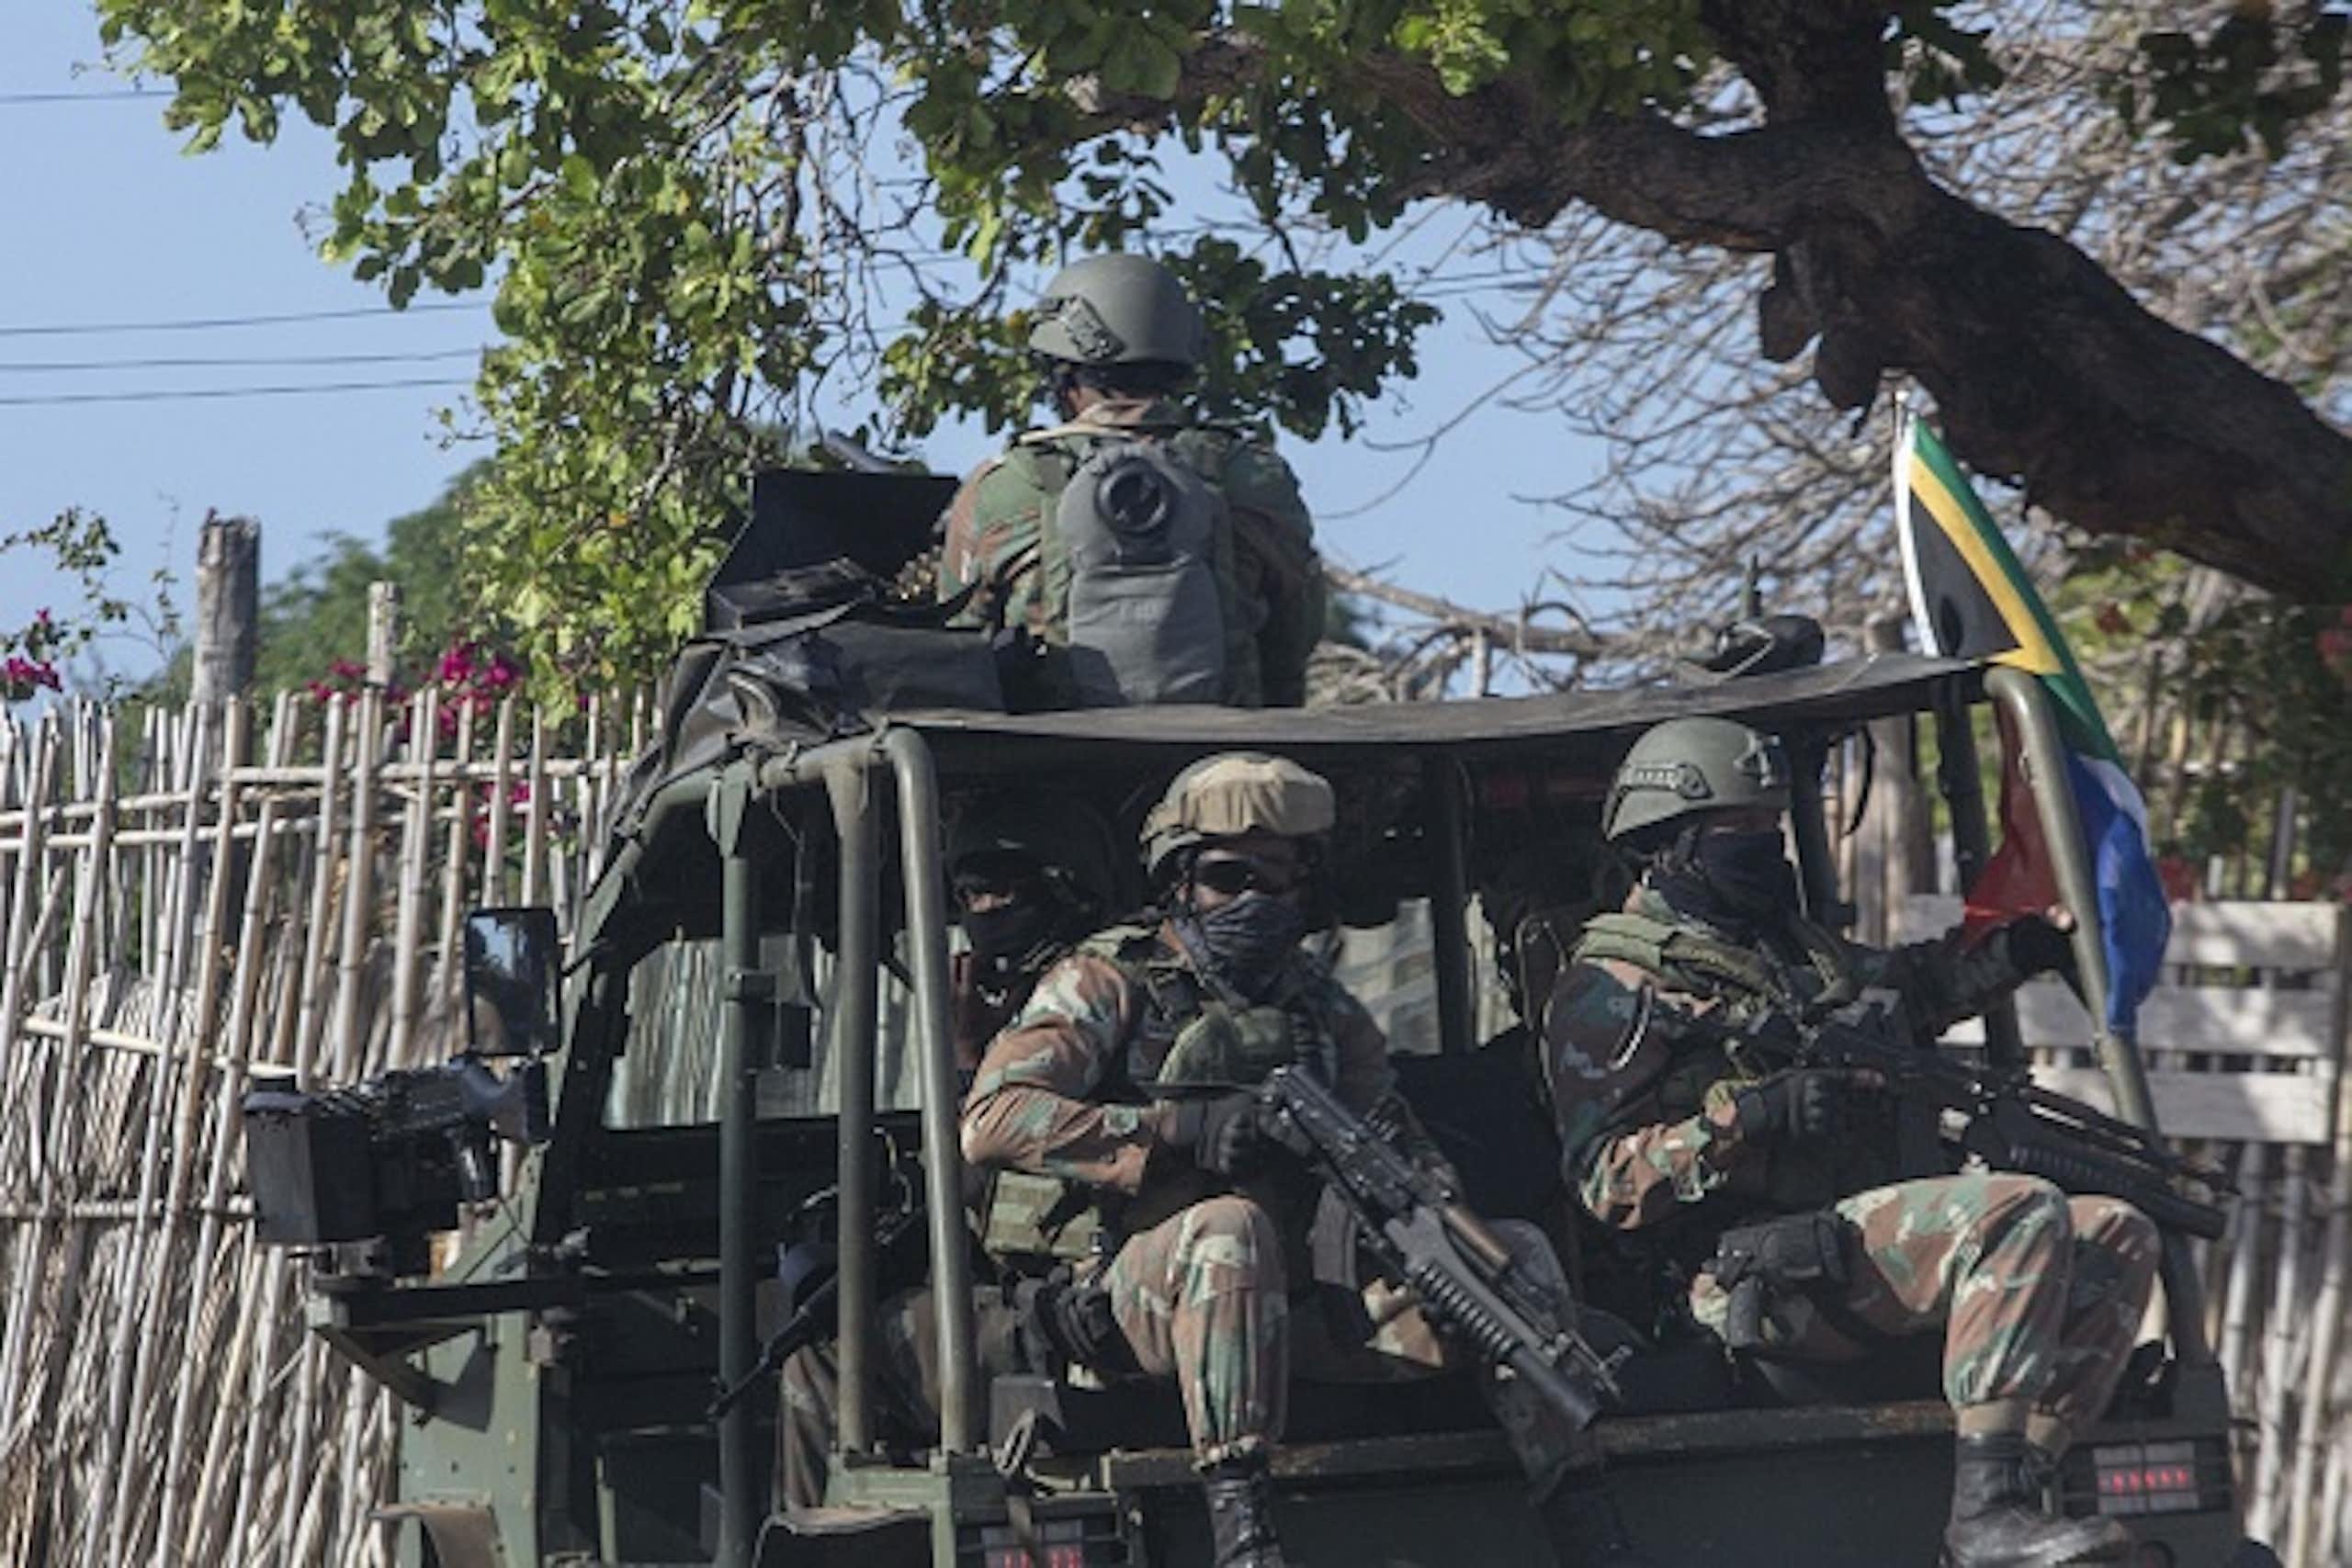 Soldiers in a military van waving the South African flag.